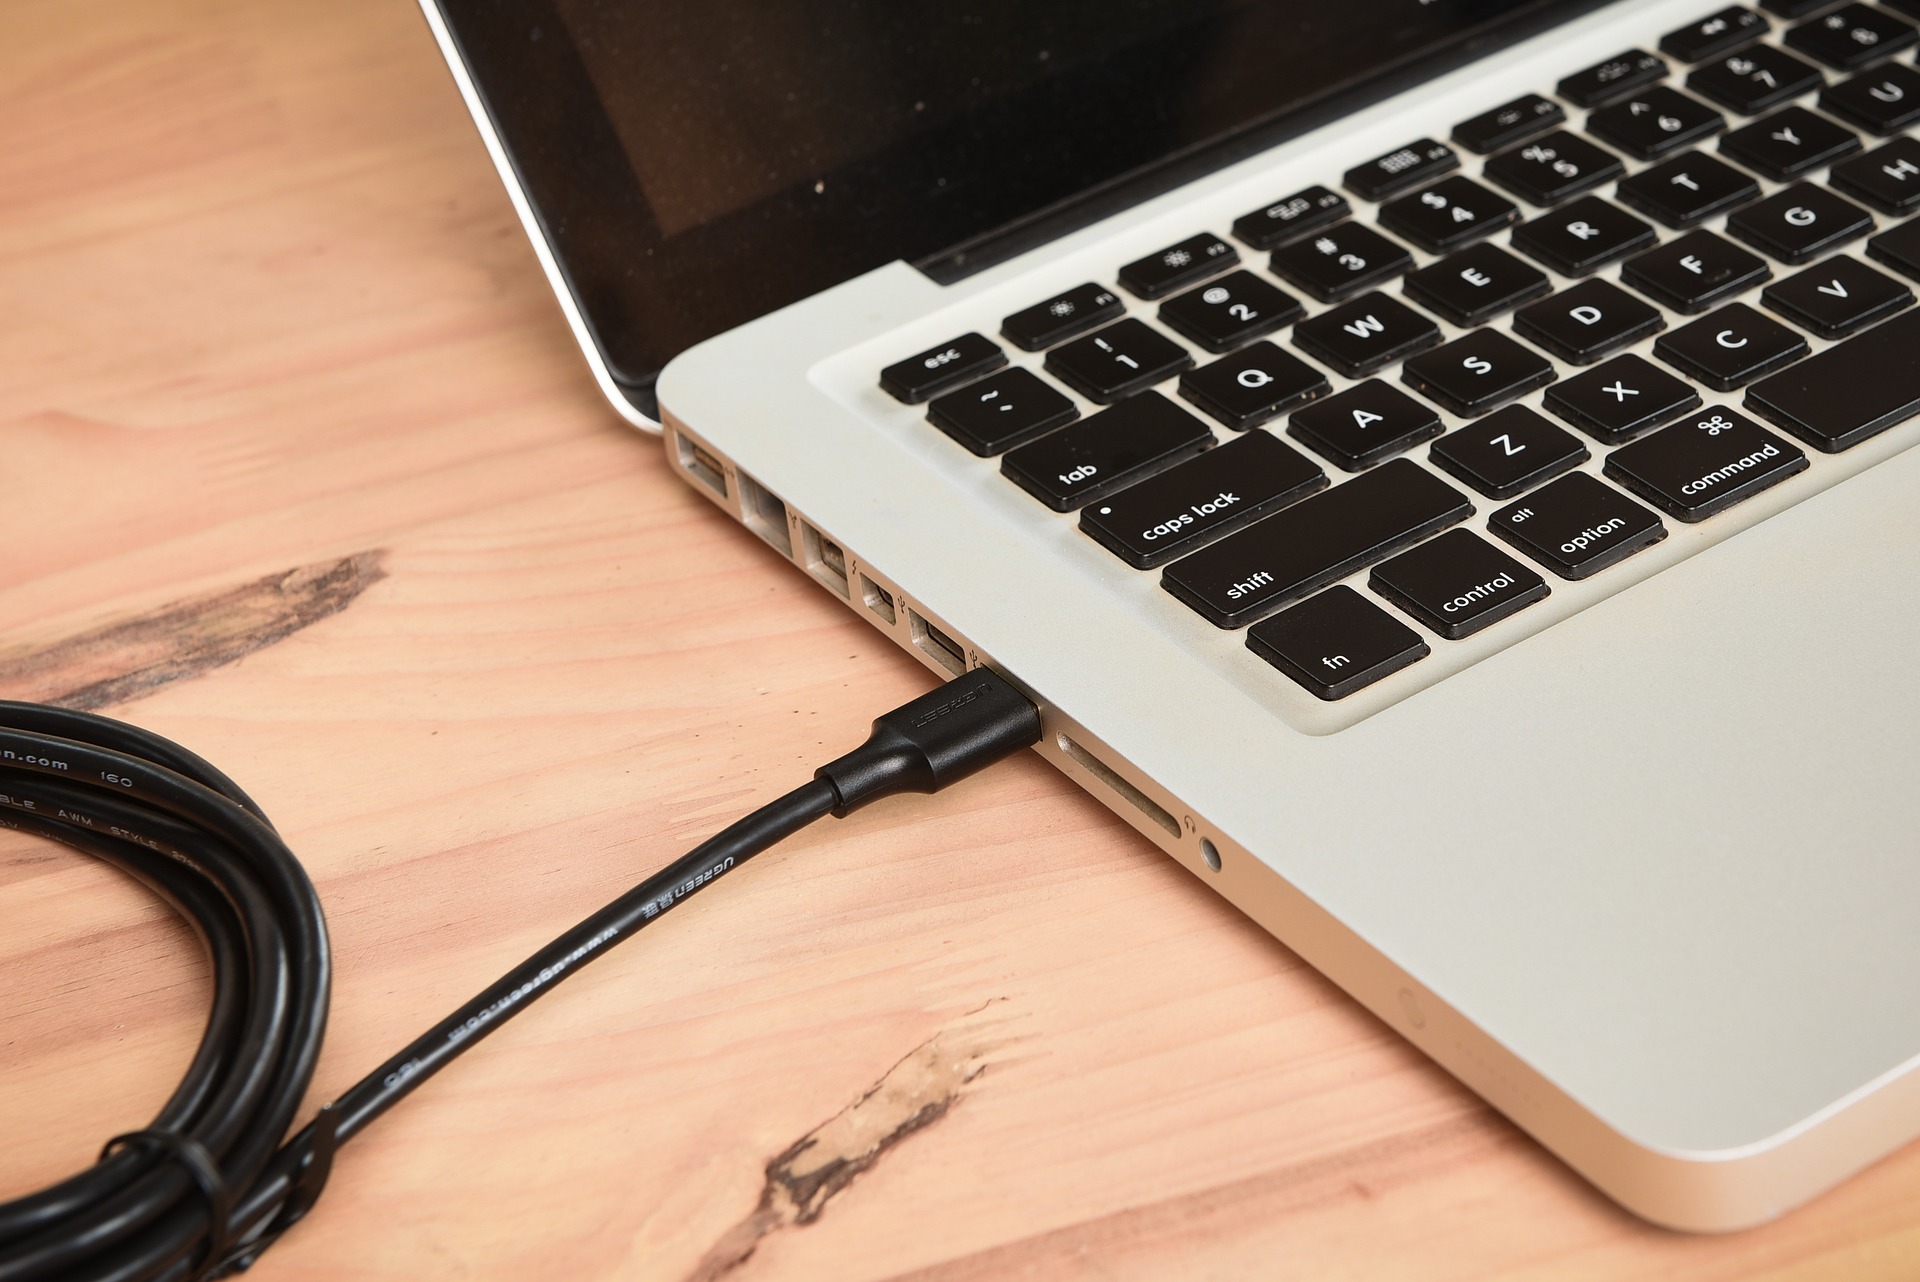 How To Connect Ethernet To Laptop Without Port